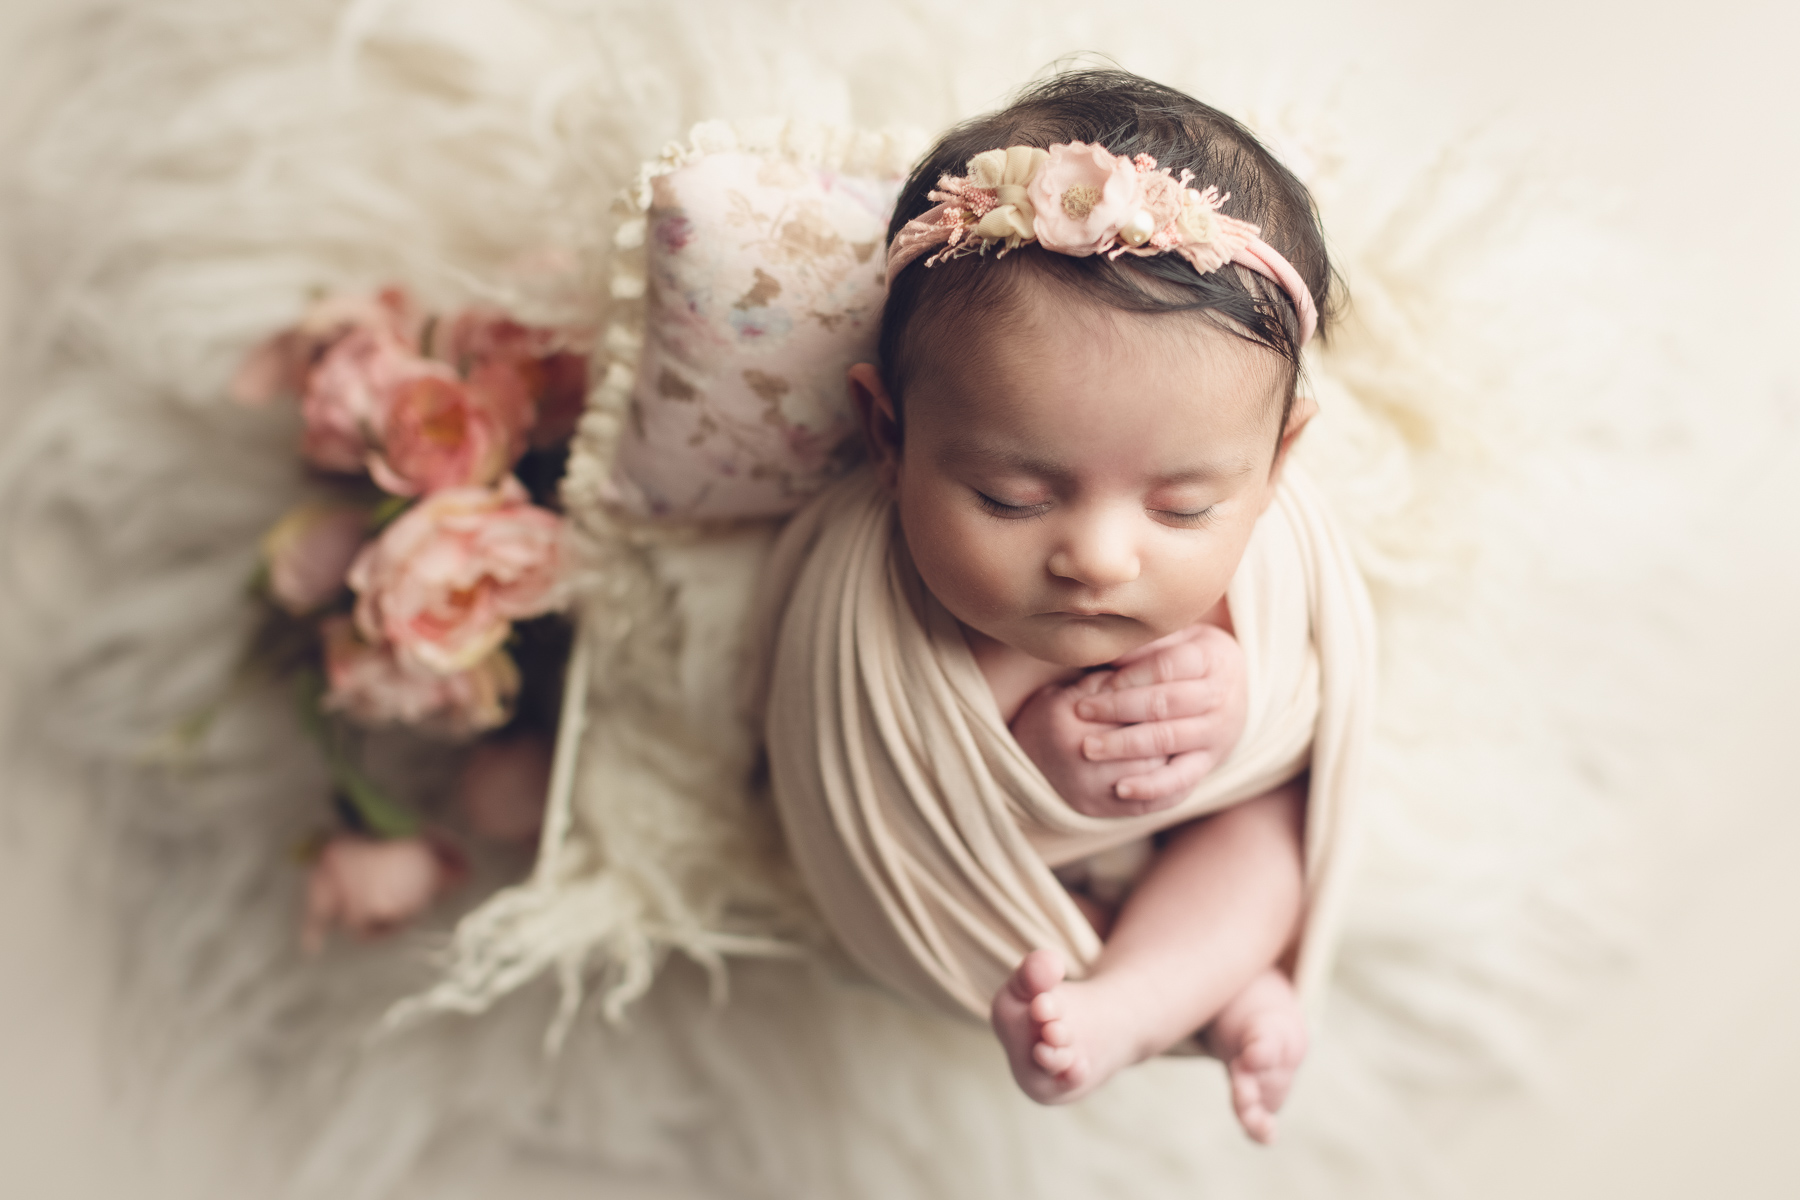 how to use props and wrap newborn for photography